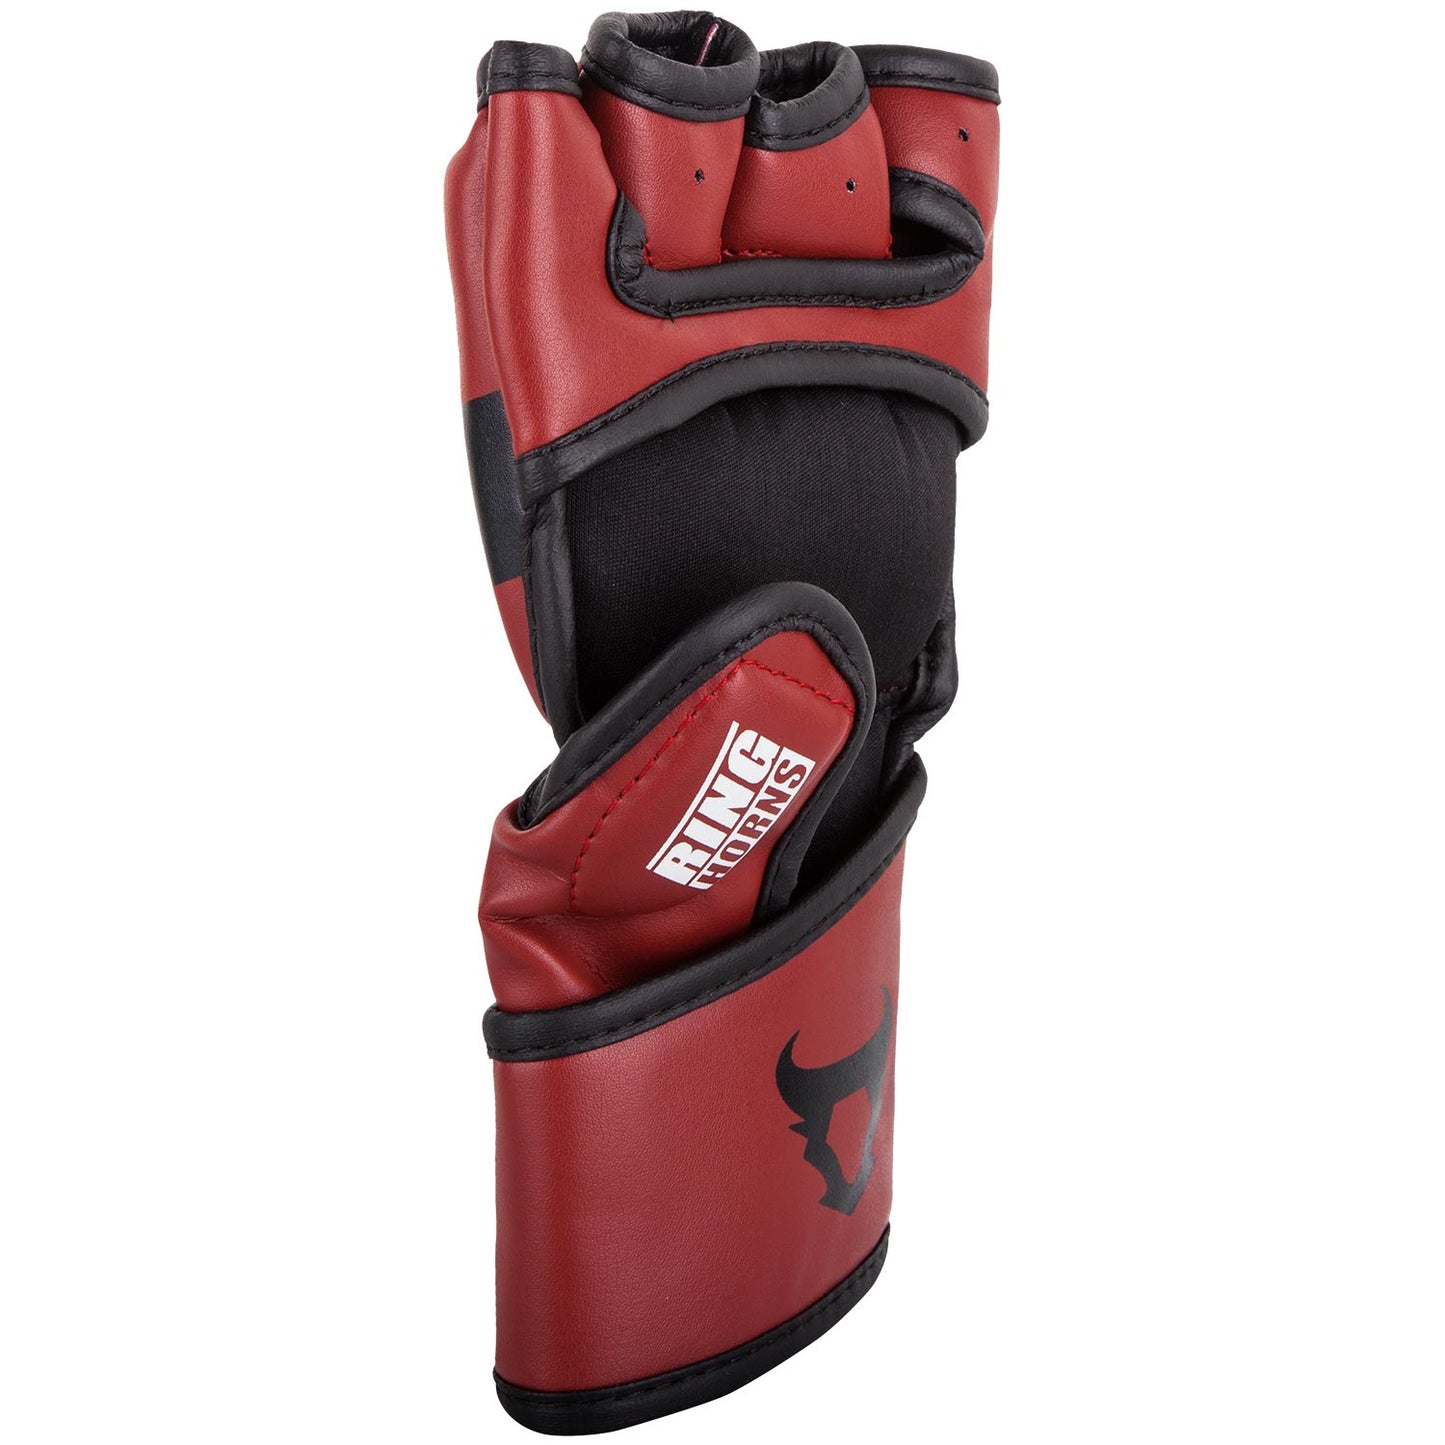 Ringhorns Charger MMA Gloves - Red